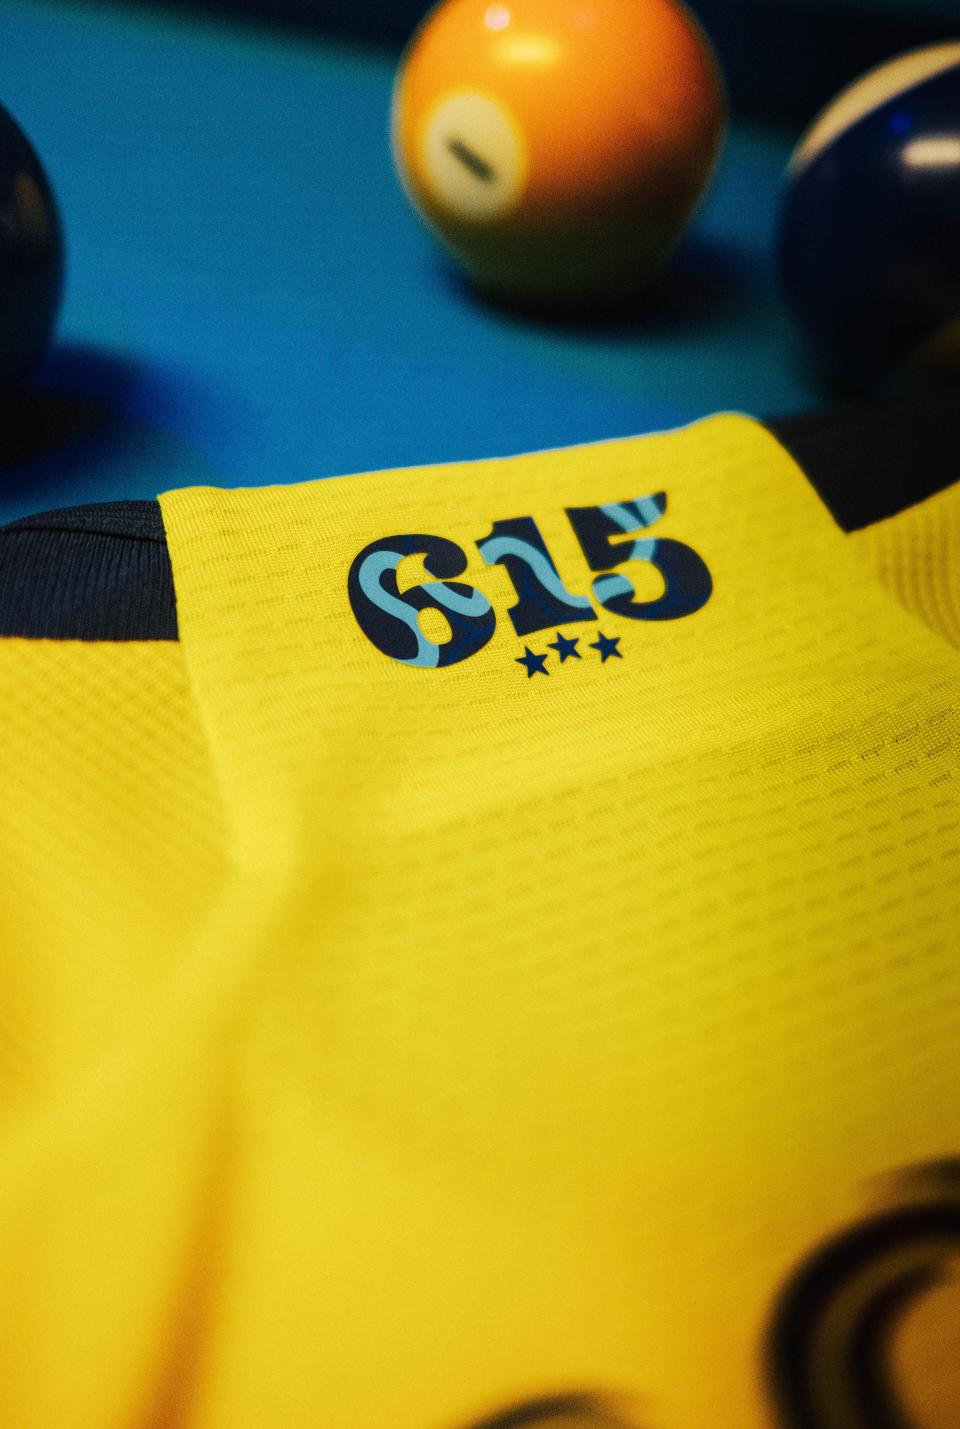 Nashville SC will debut the '615' kit in its MLS season opener Feb. 25 against the New York Red Bulls. The team will wear the jersey for the next two seasons.